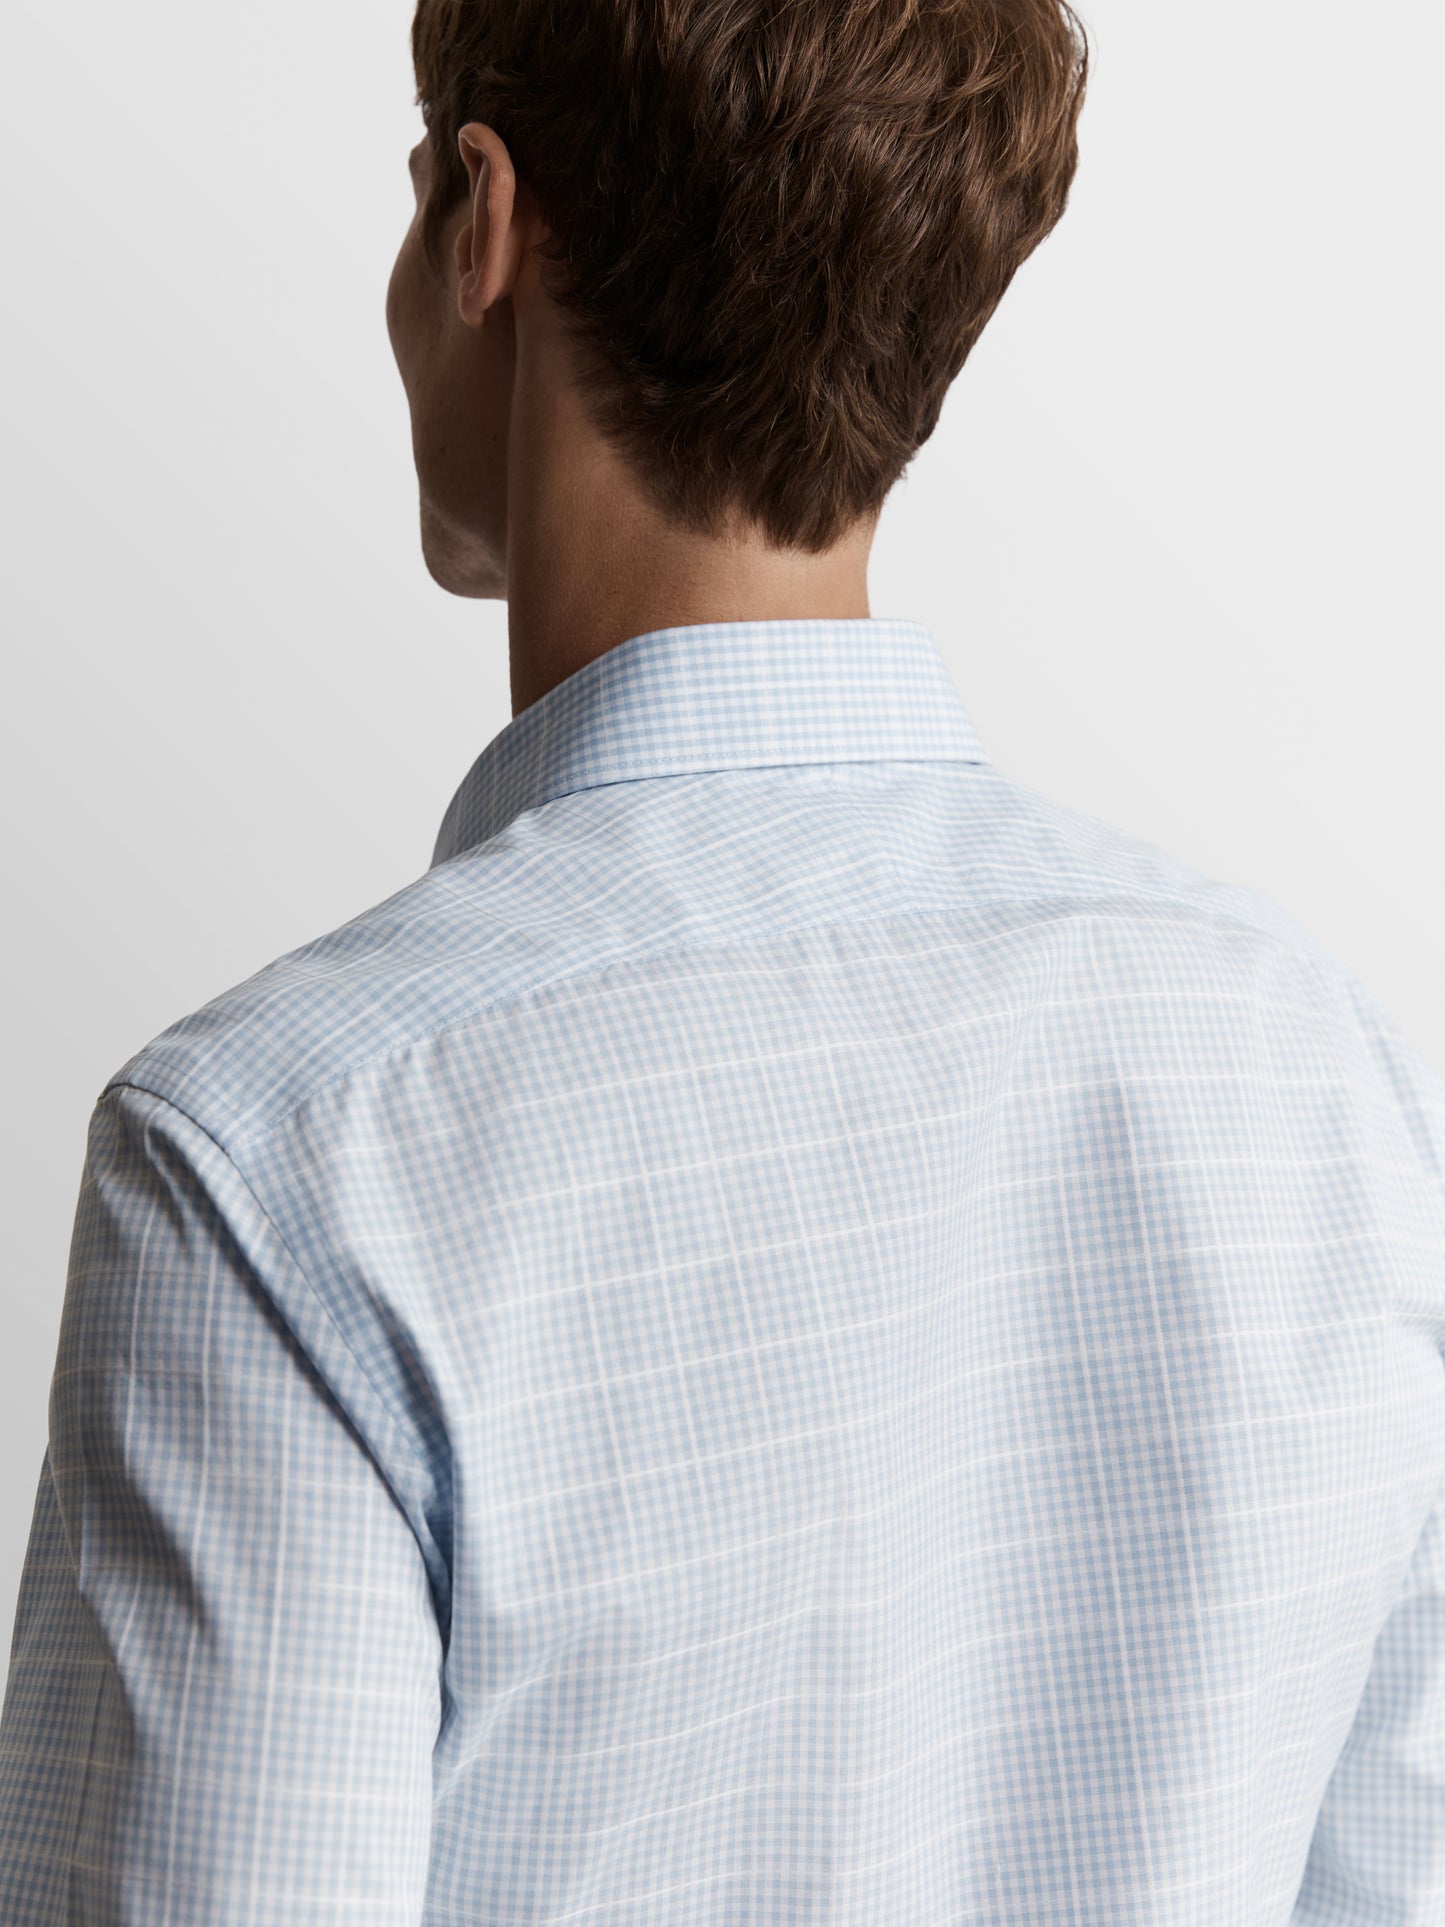 Image 3 of Non-Iron Blue Grid Gingham Plain Weave Fitted Single Cuff Semi Cutaway Collar Shirt